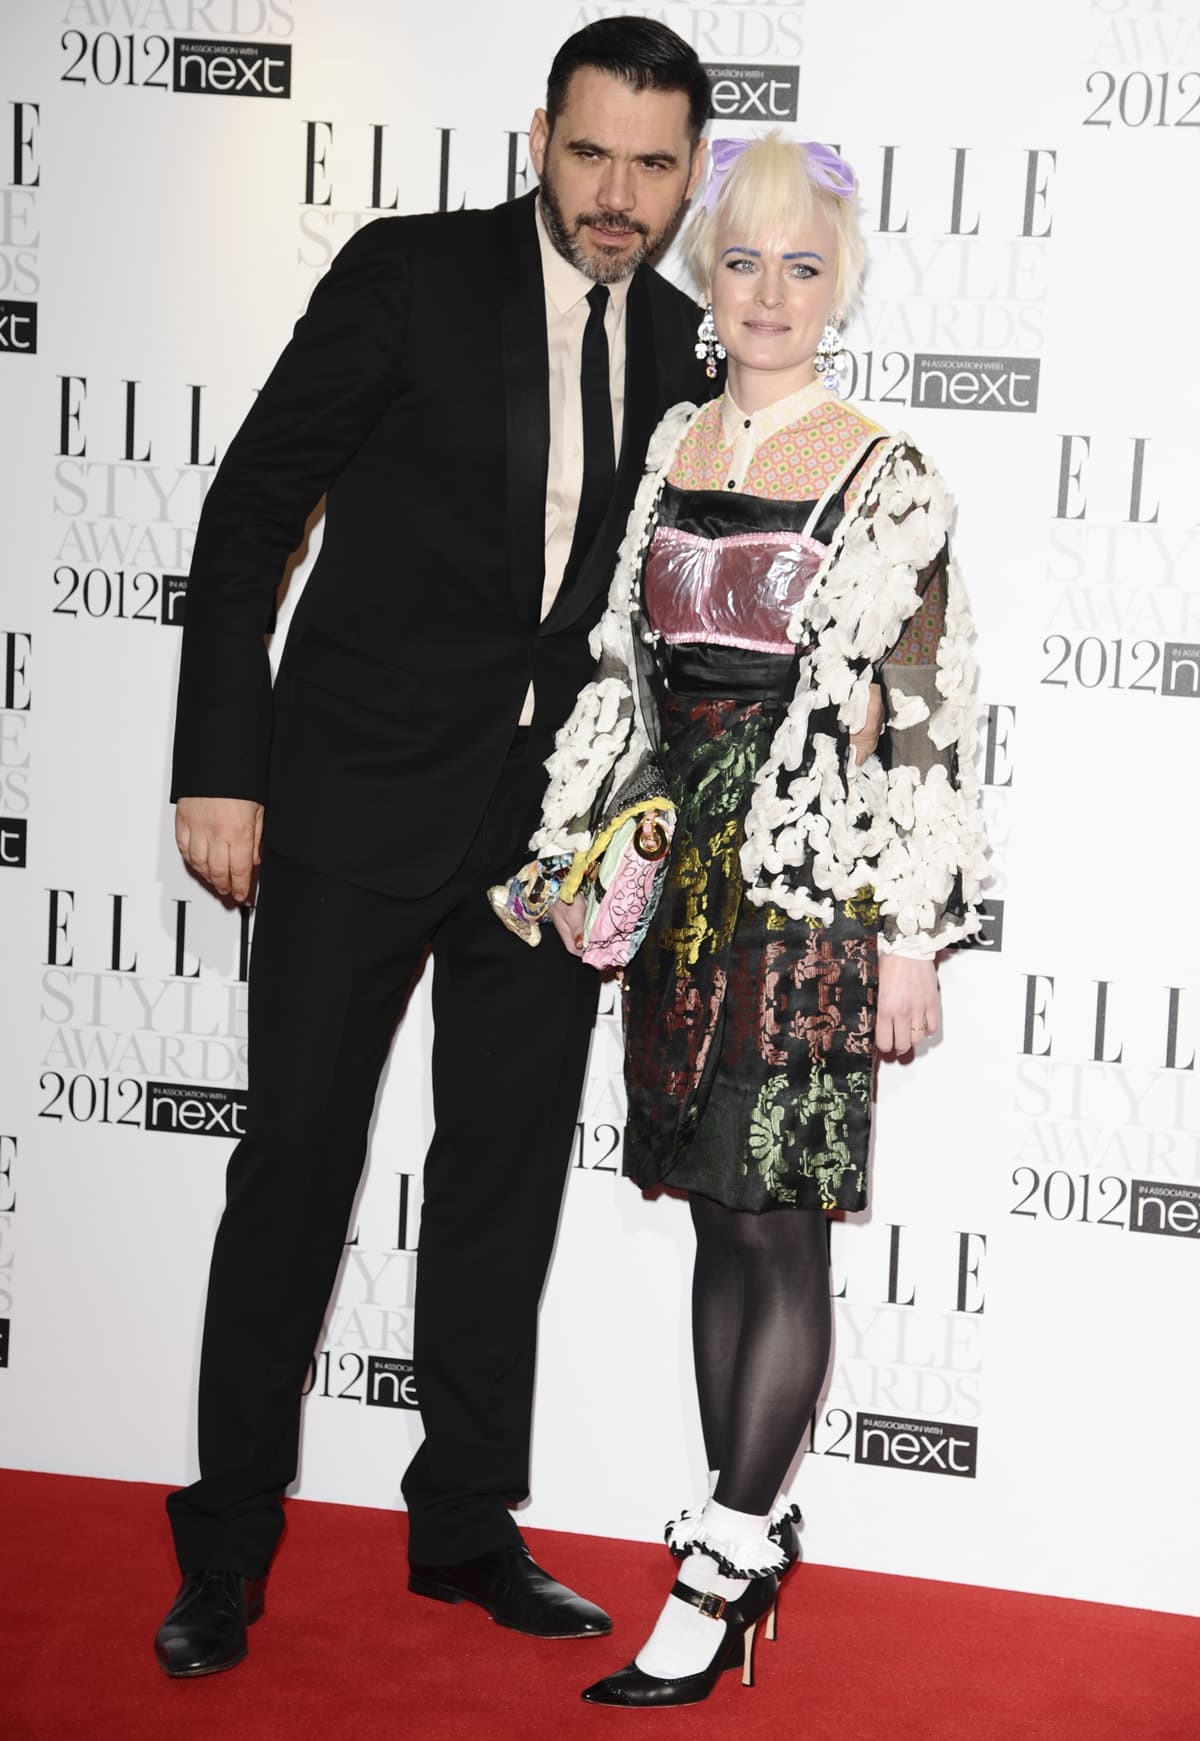 Fashion designers Roland Mouret and Louise Gray arrive for The Elle Style Awards